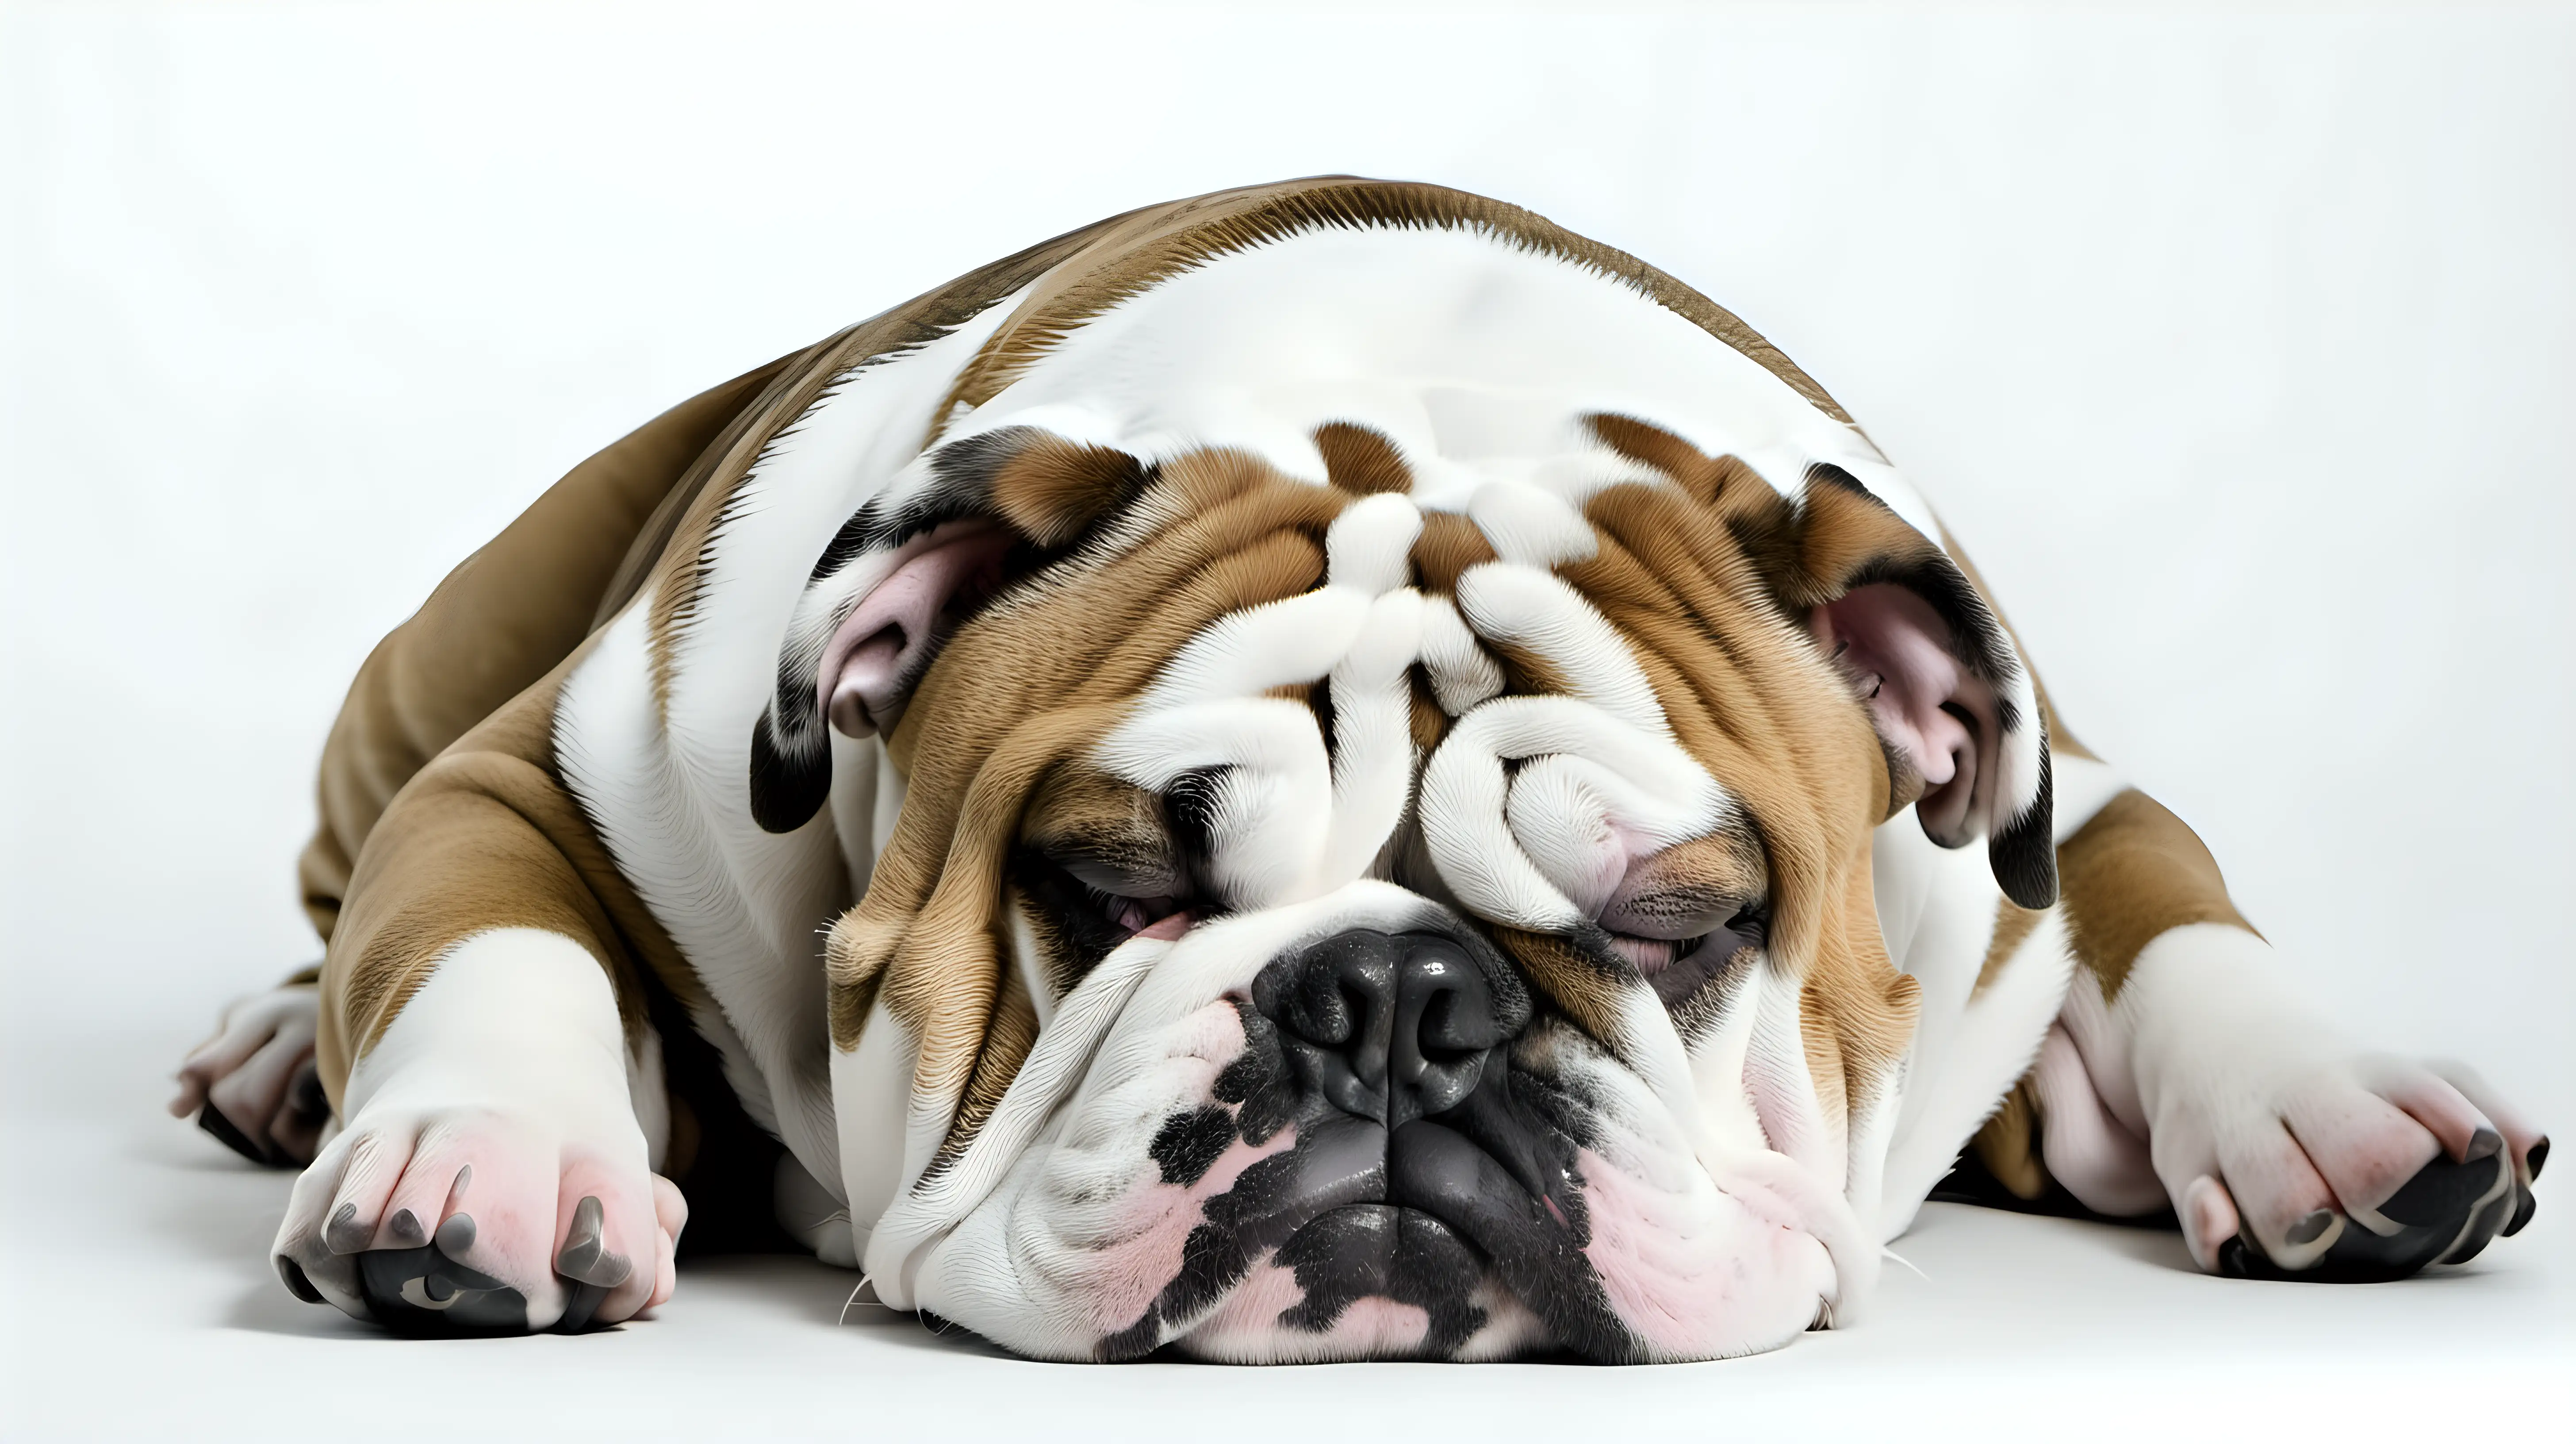 An English Bulldog, lying down asleep, eyes closed, against a solid white background. Eyes closed.